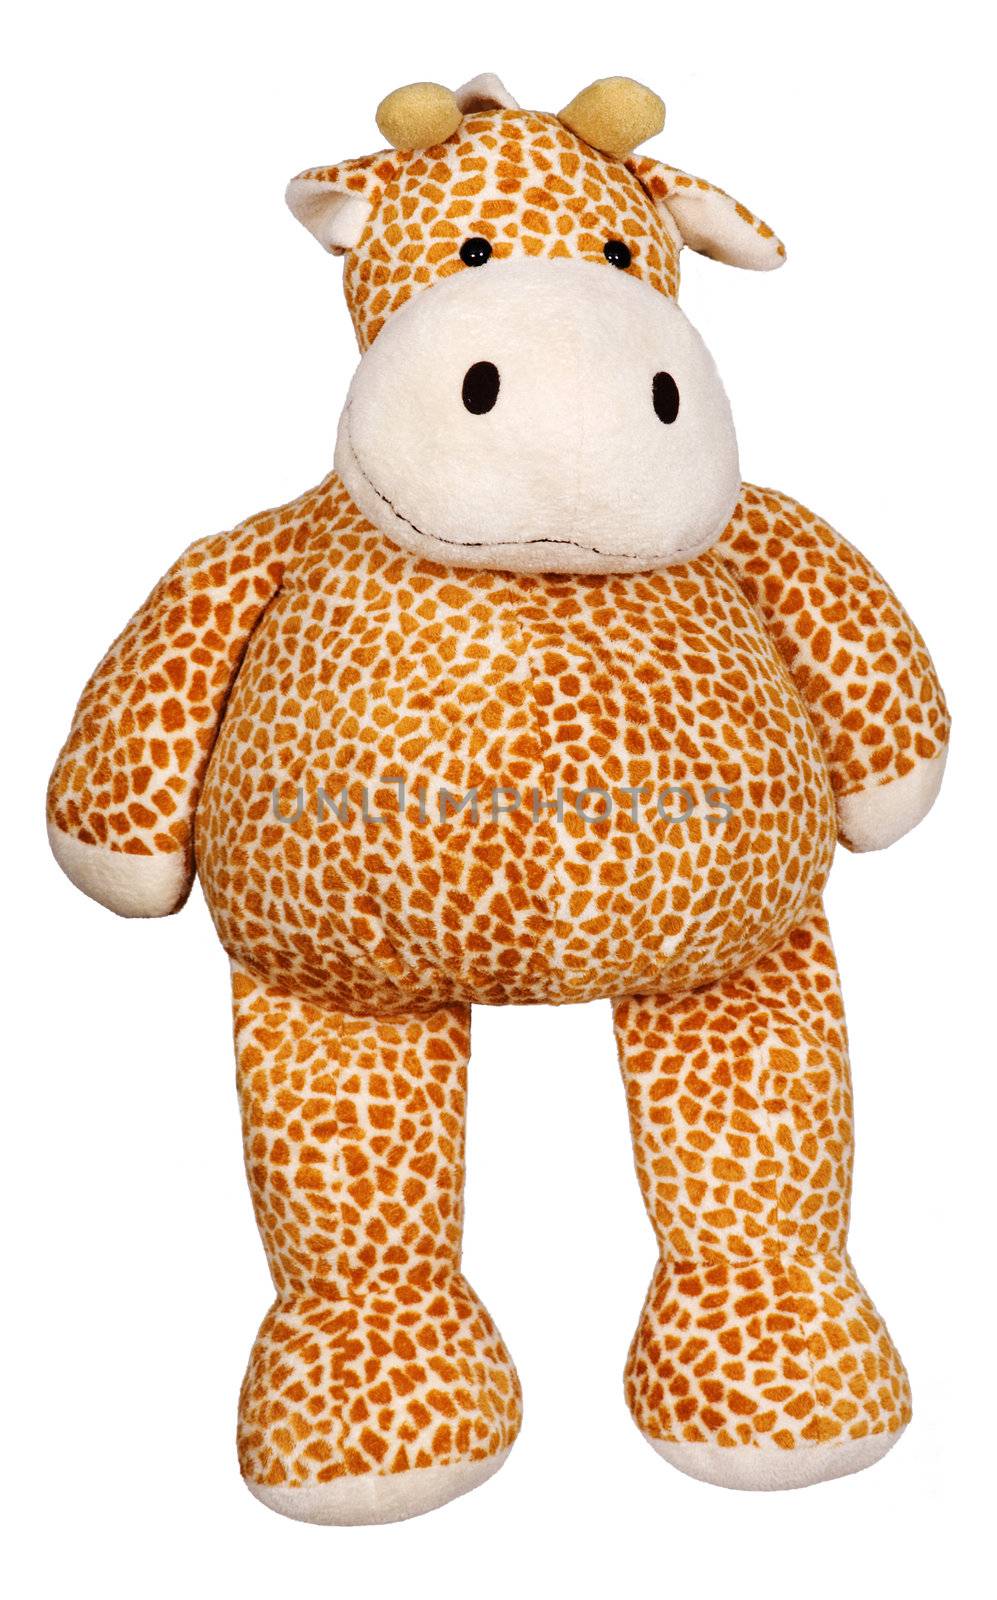 Toy giraffe on a white background by pzaxe